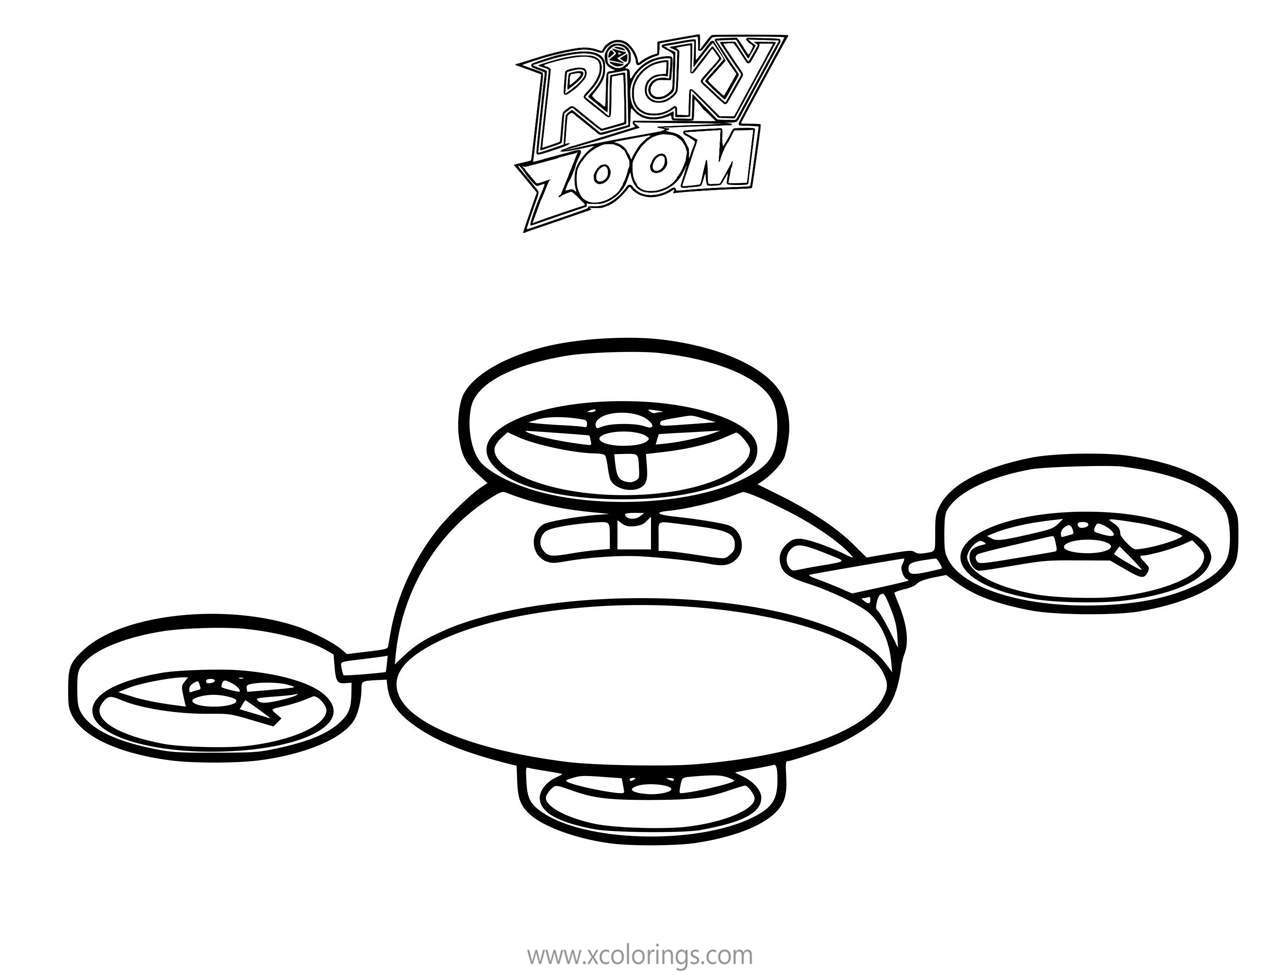 Free Ricky Zoom Coloring Pages Quadcopter printable